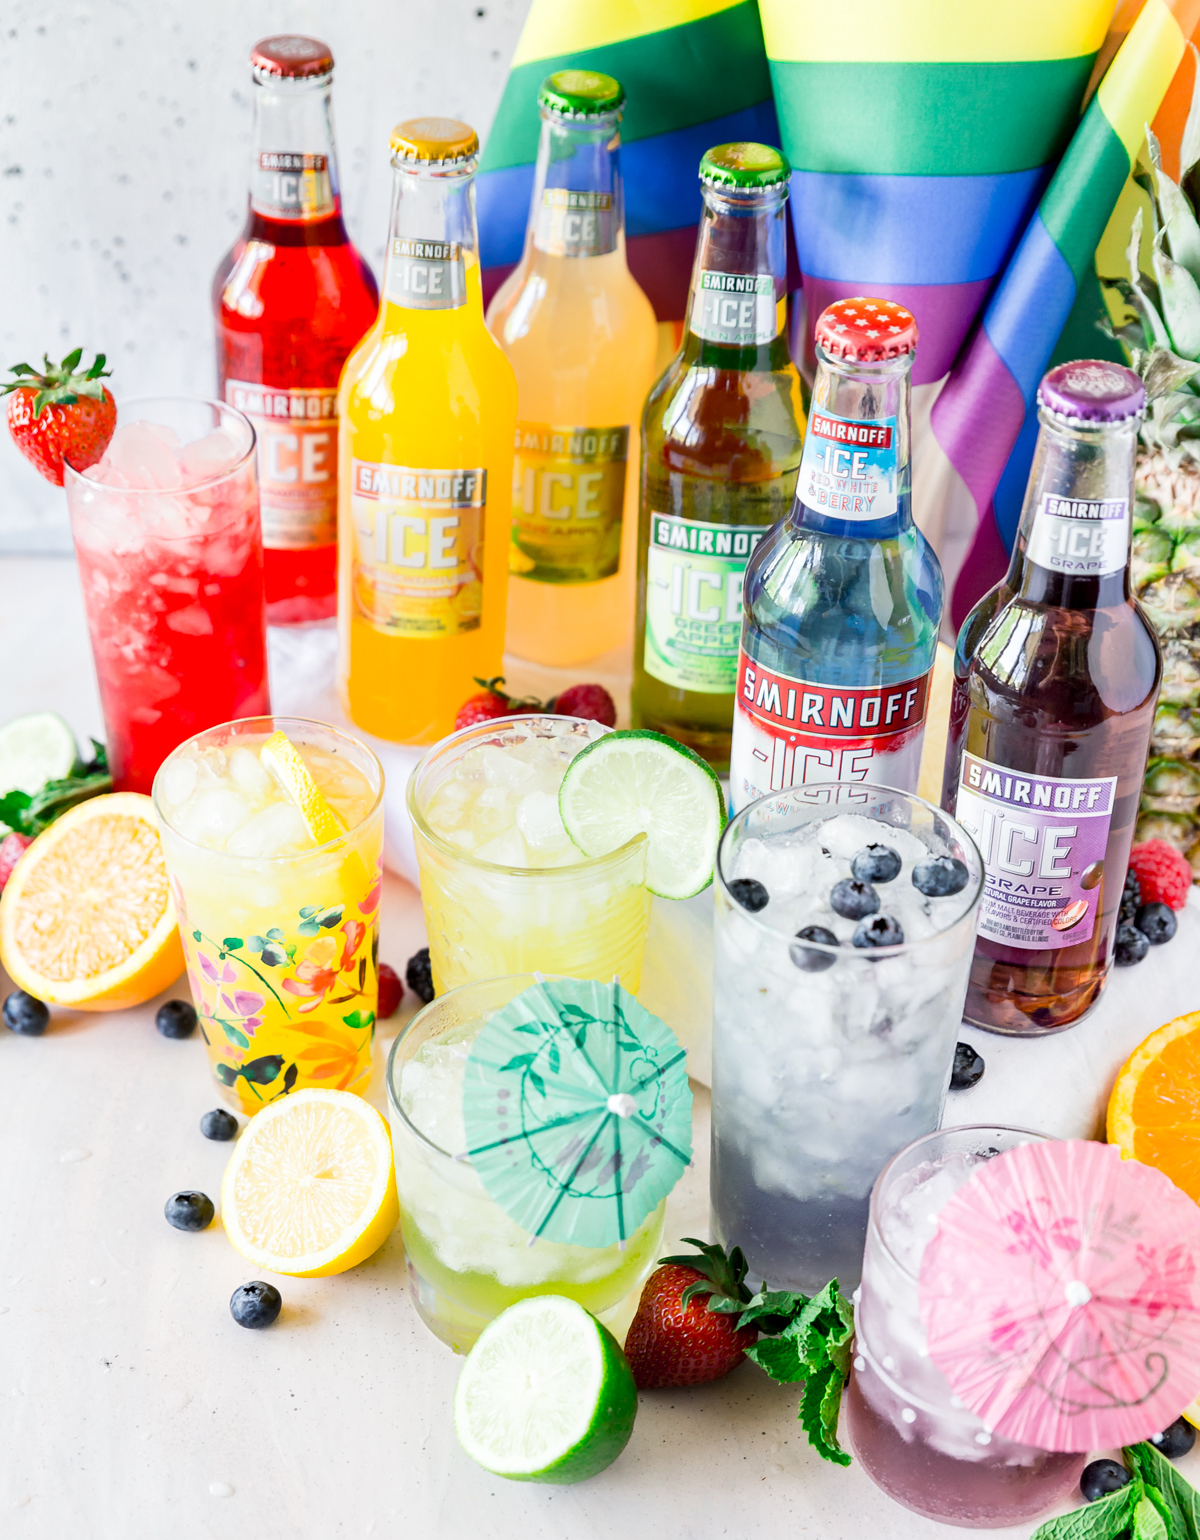 Pride drinks from Smirnoff feature Smirnoff ICE and were crafted to honor June, which is gay pride month in many countries, including the united states. 